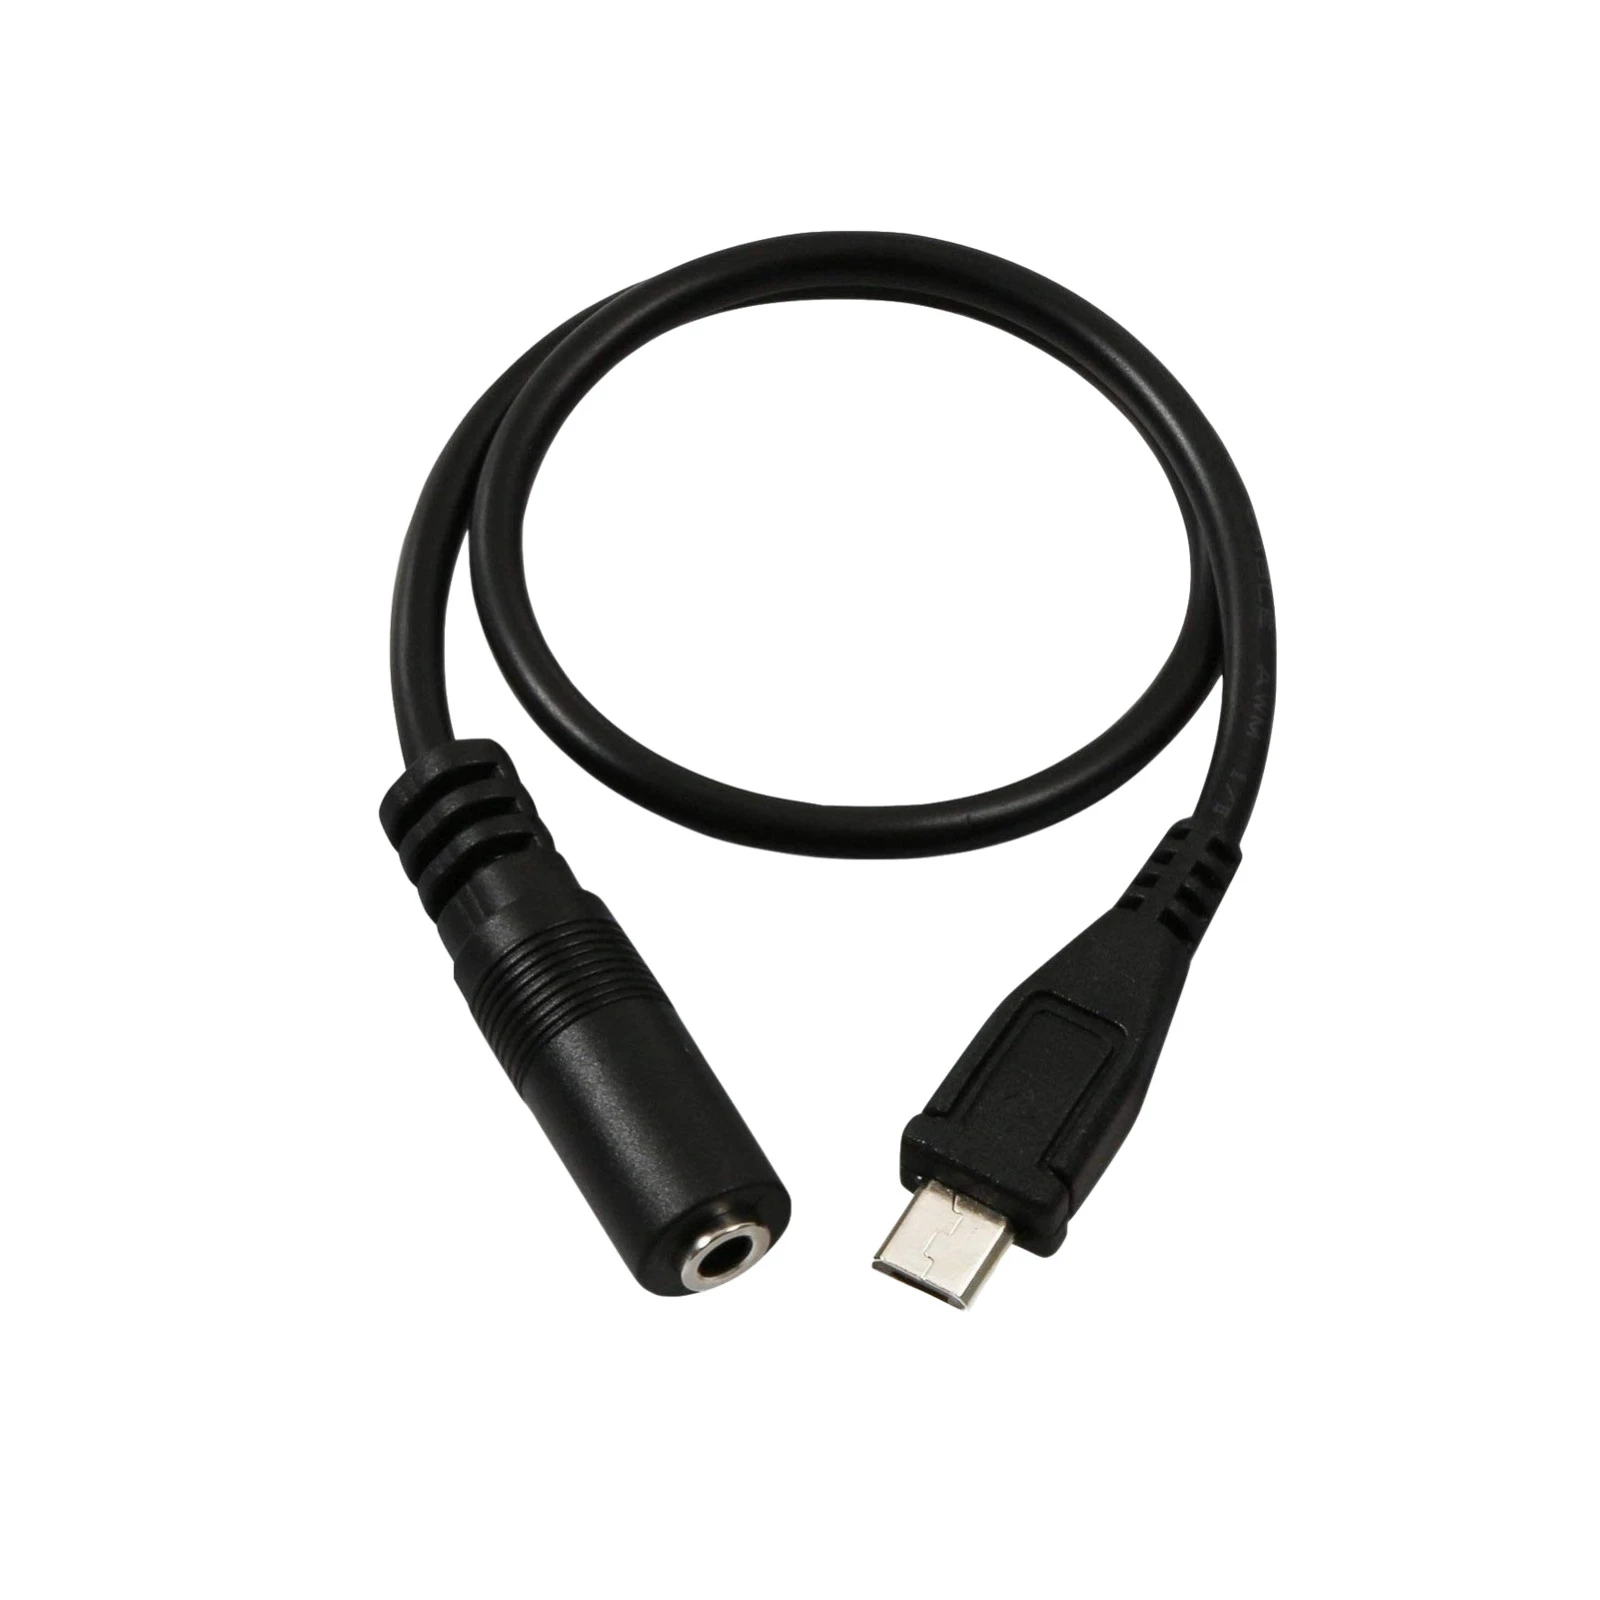 1x Micro USB 5 Pin Male To 3.5mm Female Jack AUX Audio Sync Headphone Adapter Cable Cord 30cm 50cm